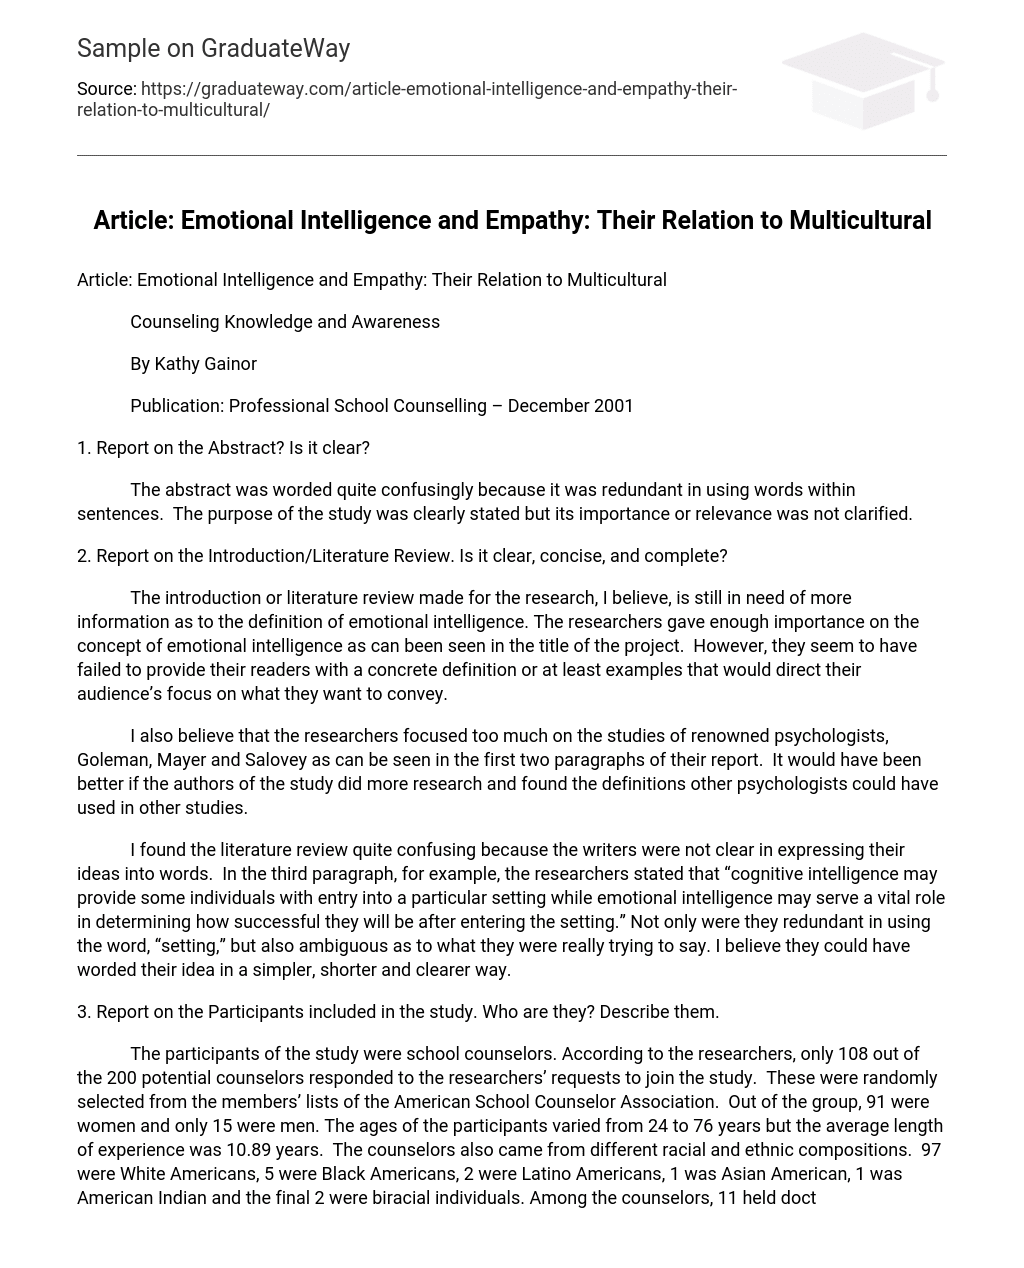 Article: Emotional Intelligence and Empathy: Their Relation to Multicultural